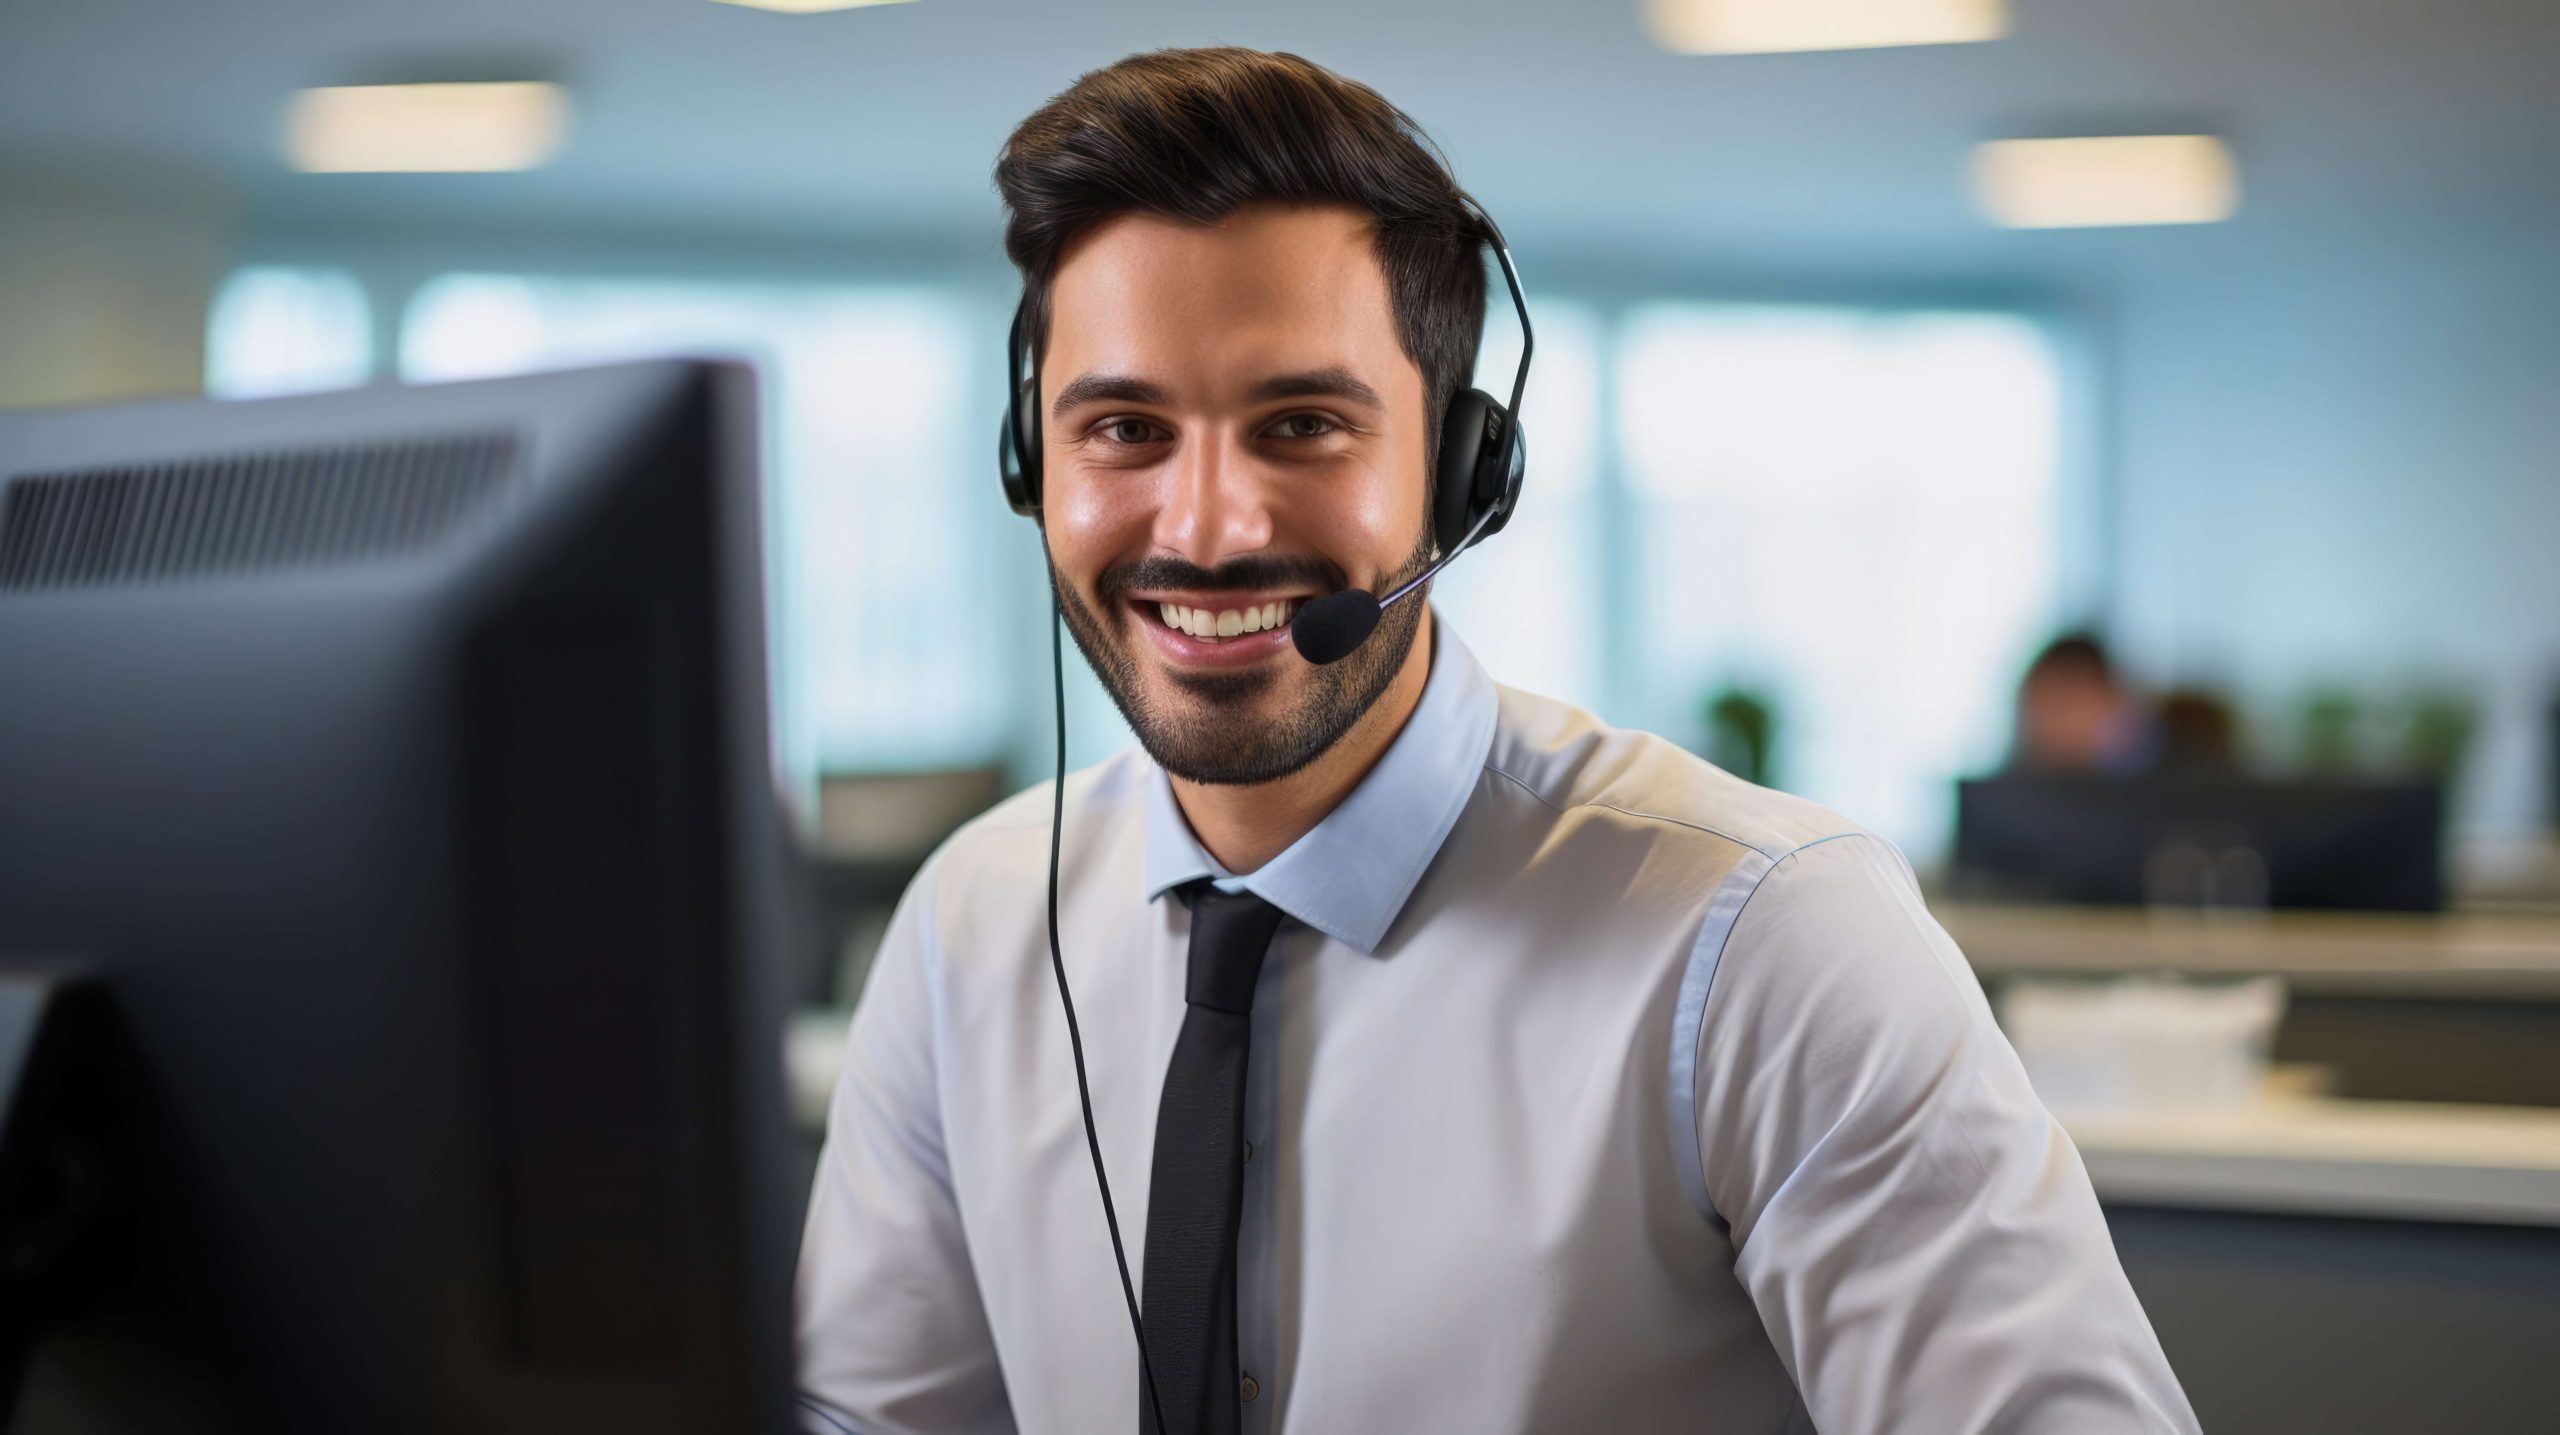 man in office with headset on